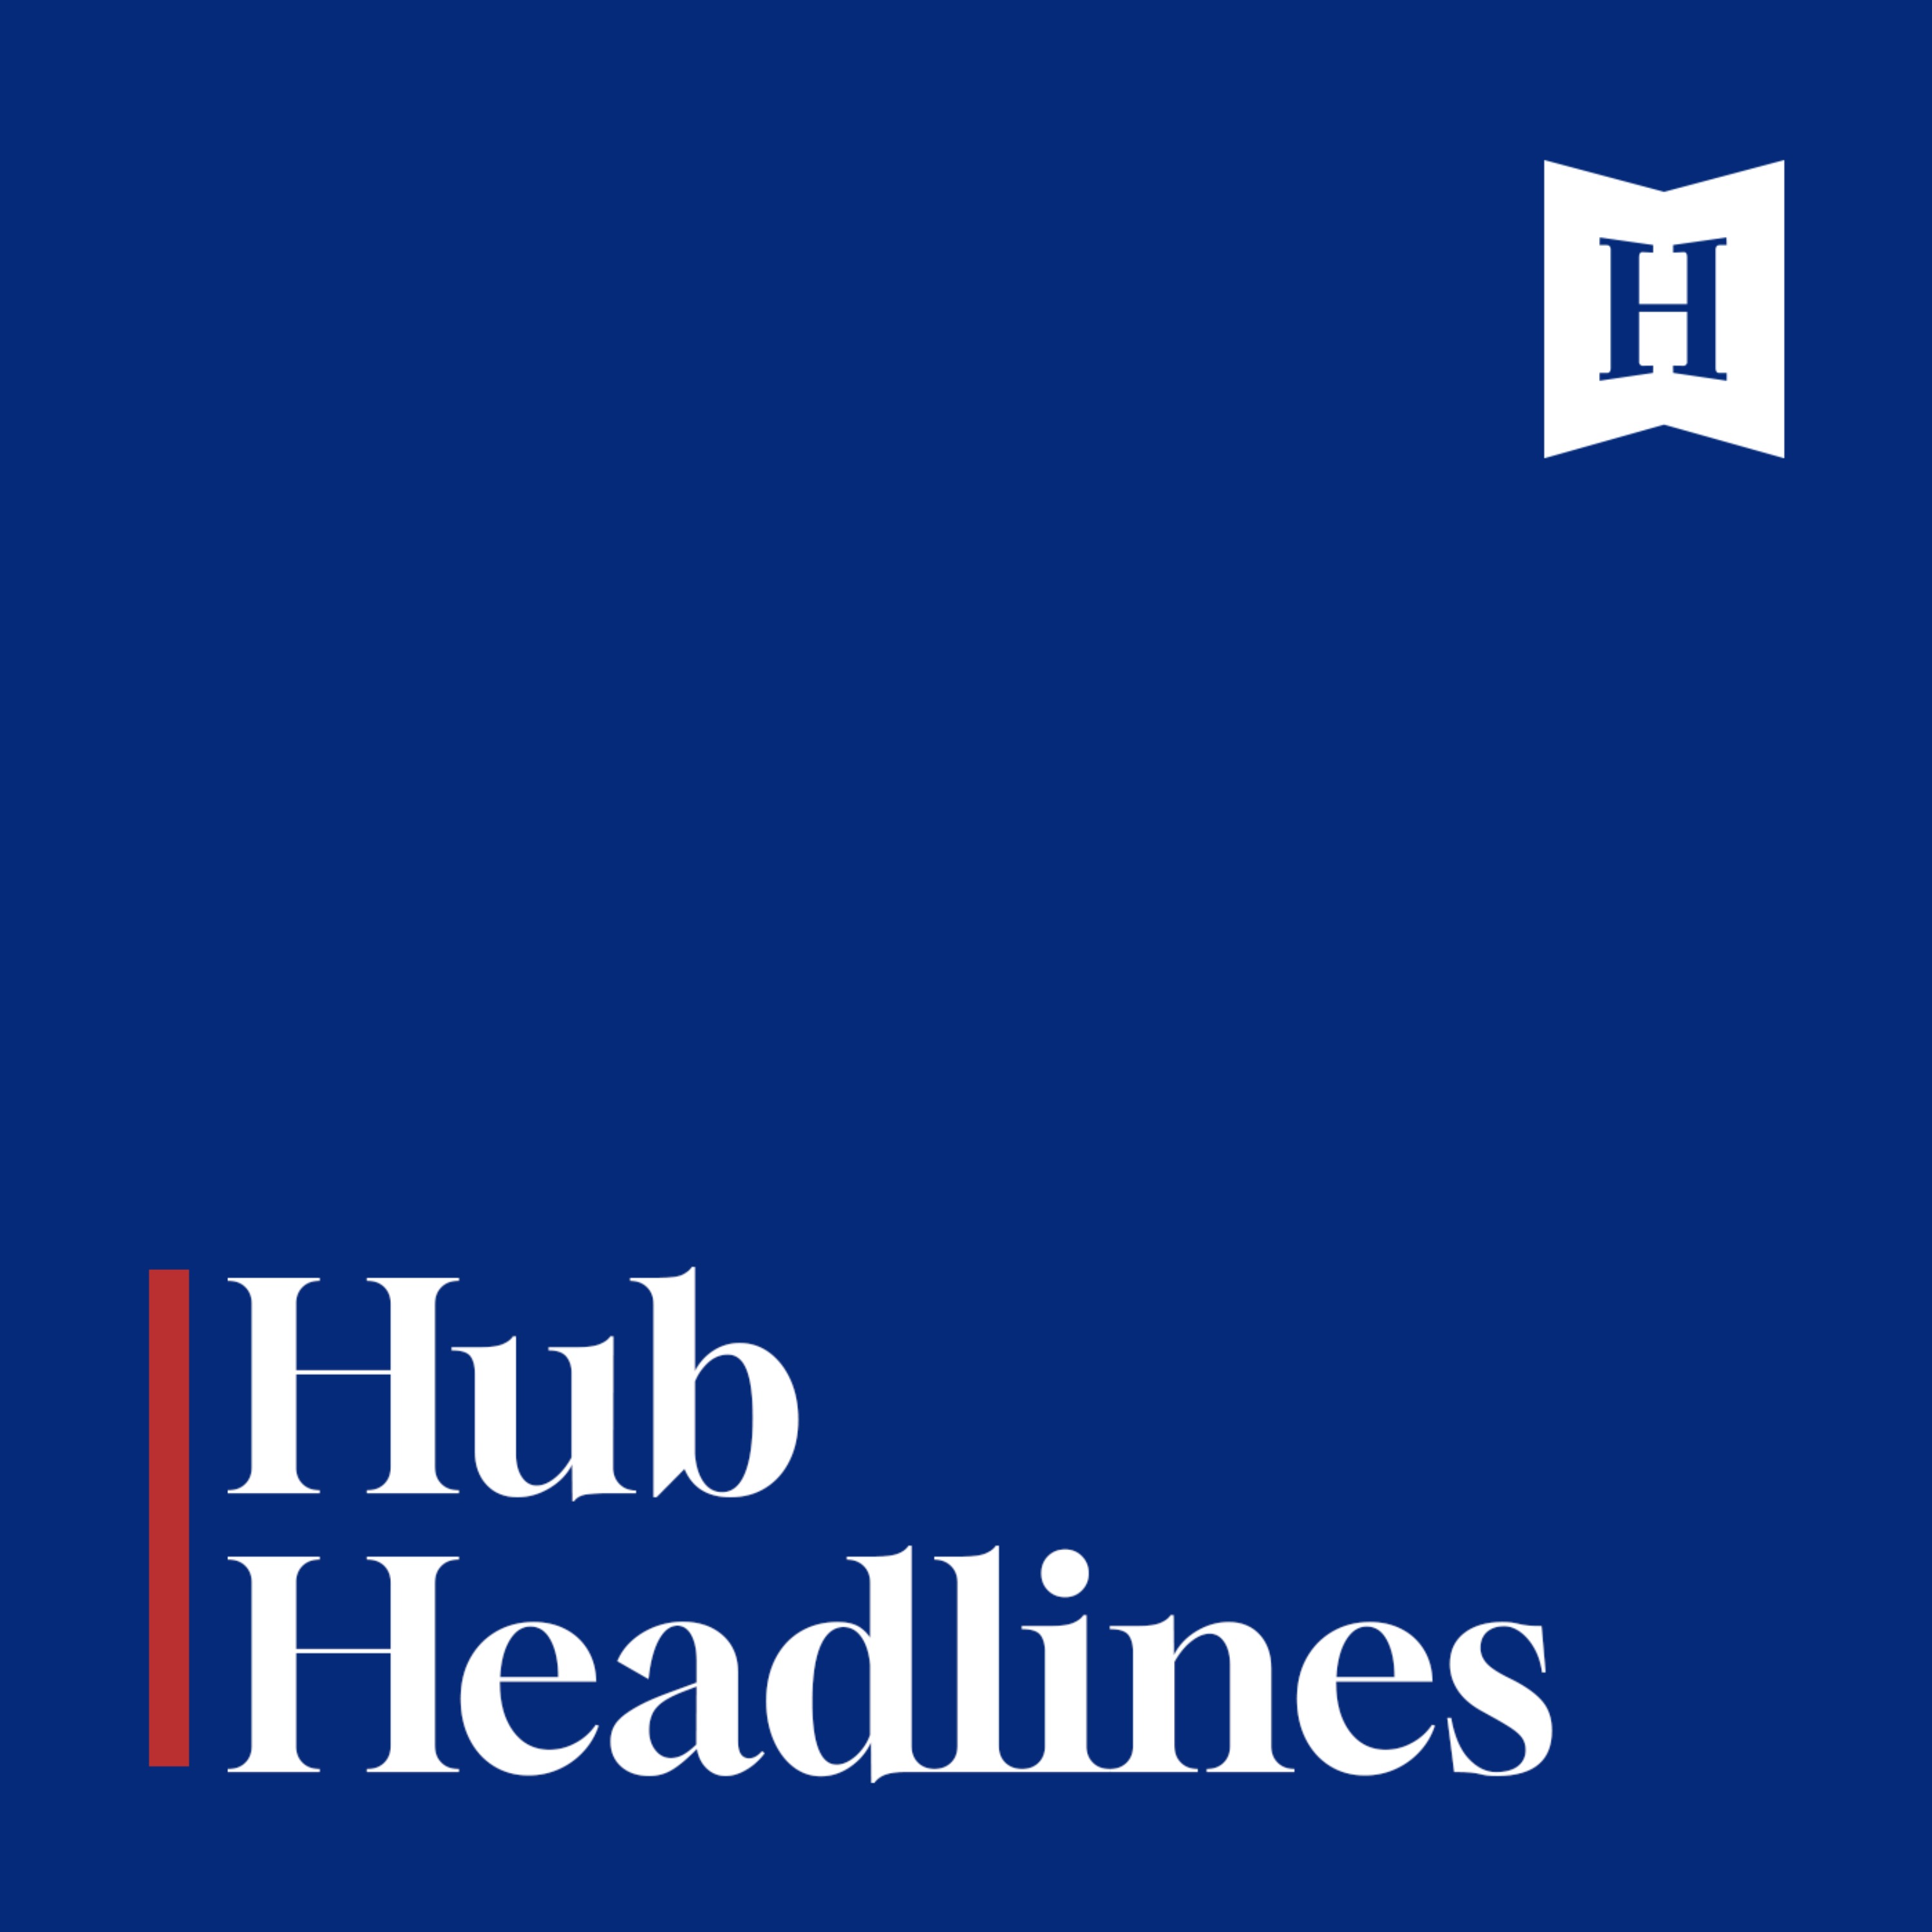 Hub Headlines: The U.S. is not your punching bag